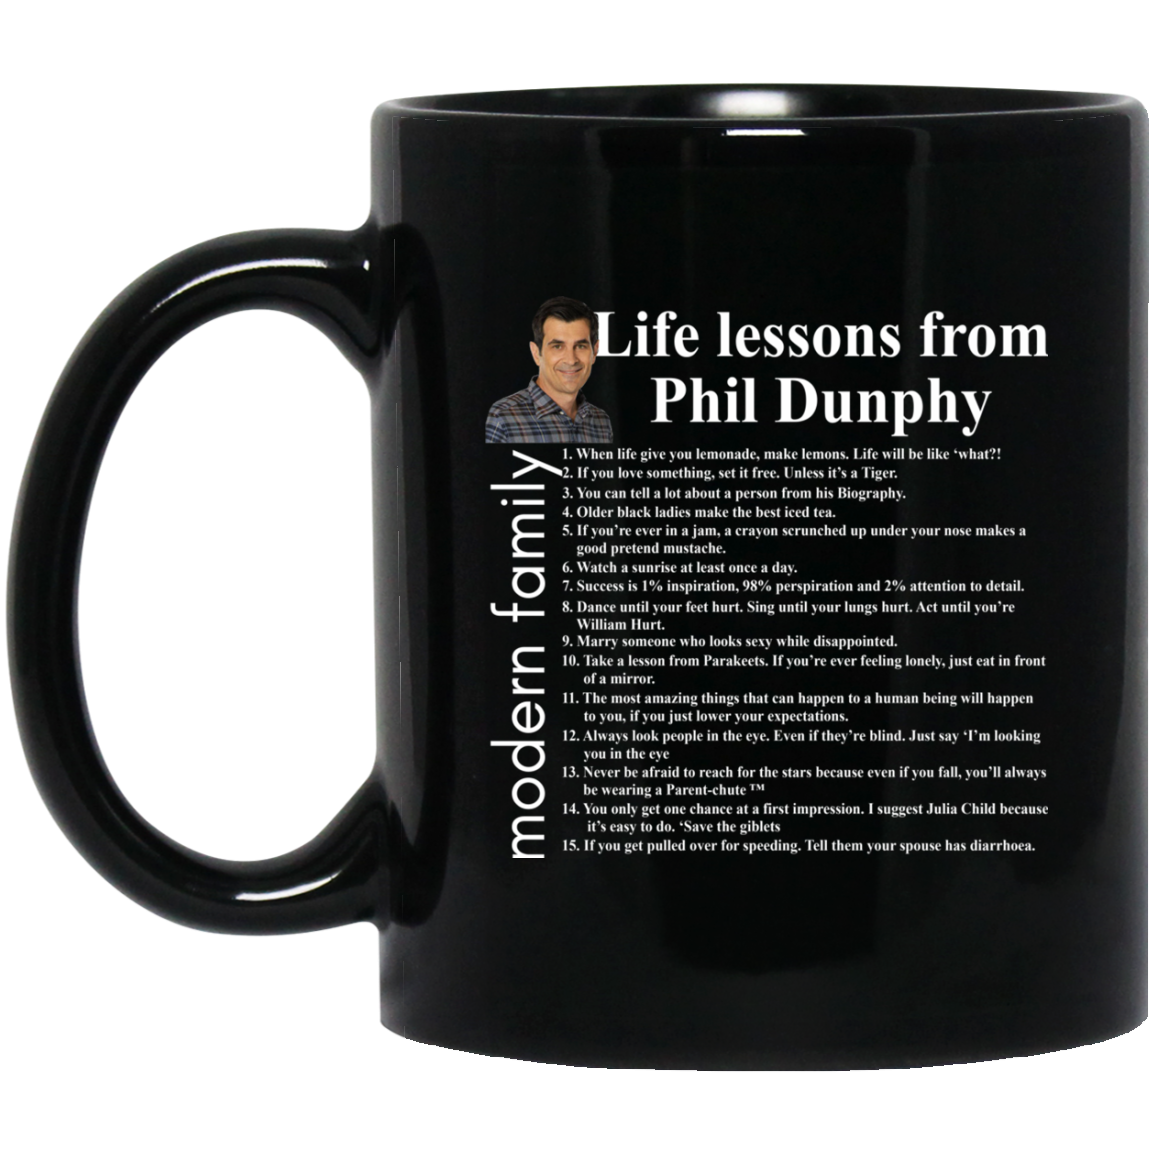 Life lessons from Phil Dunphy Mug